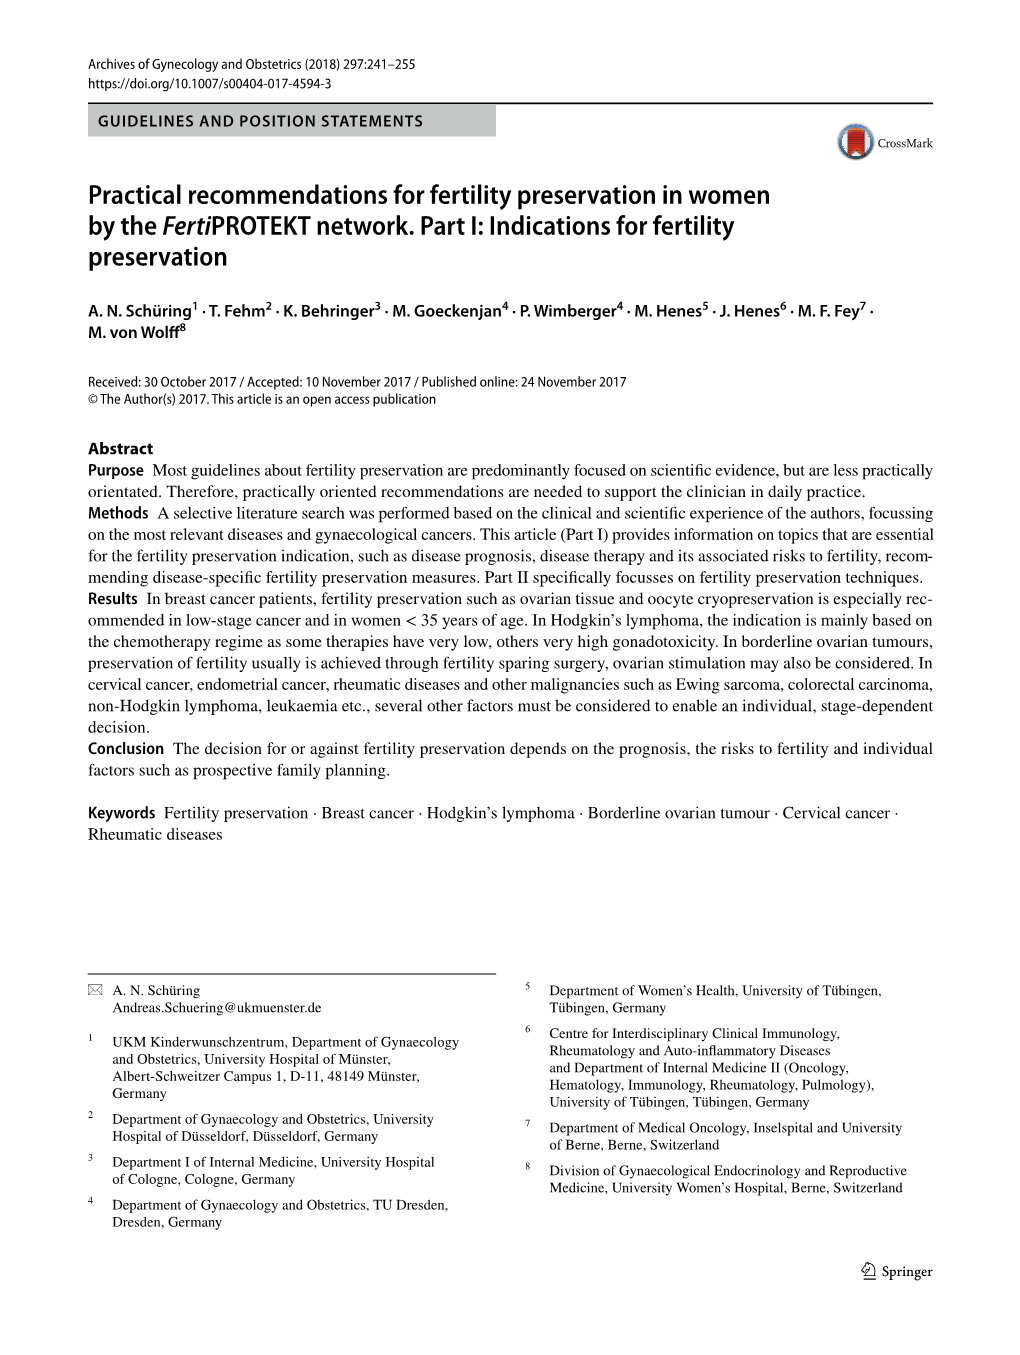 Practical Recommendations for Fertility Preservation in Women by the Fertiprotekt Network